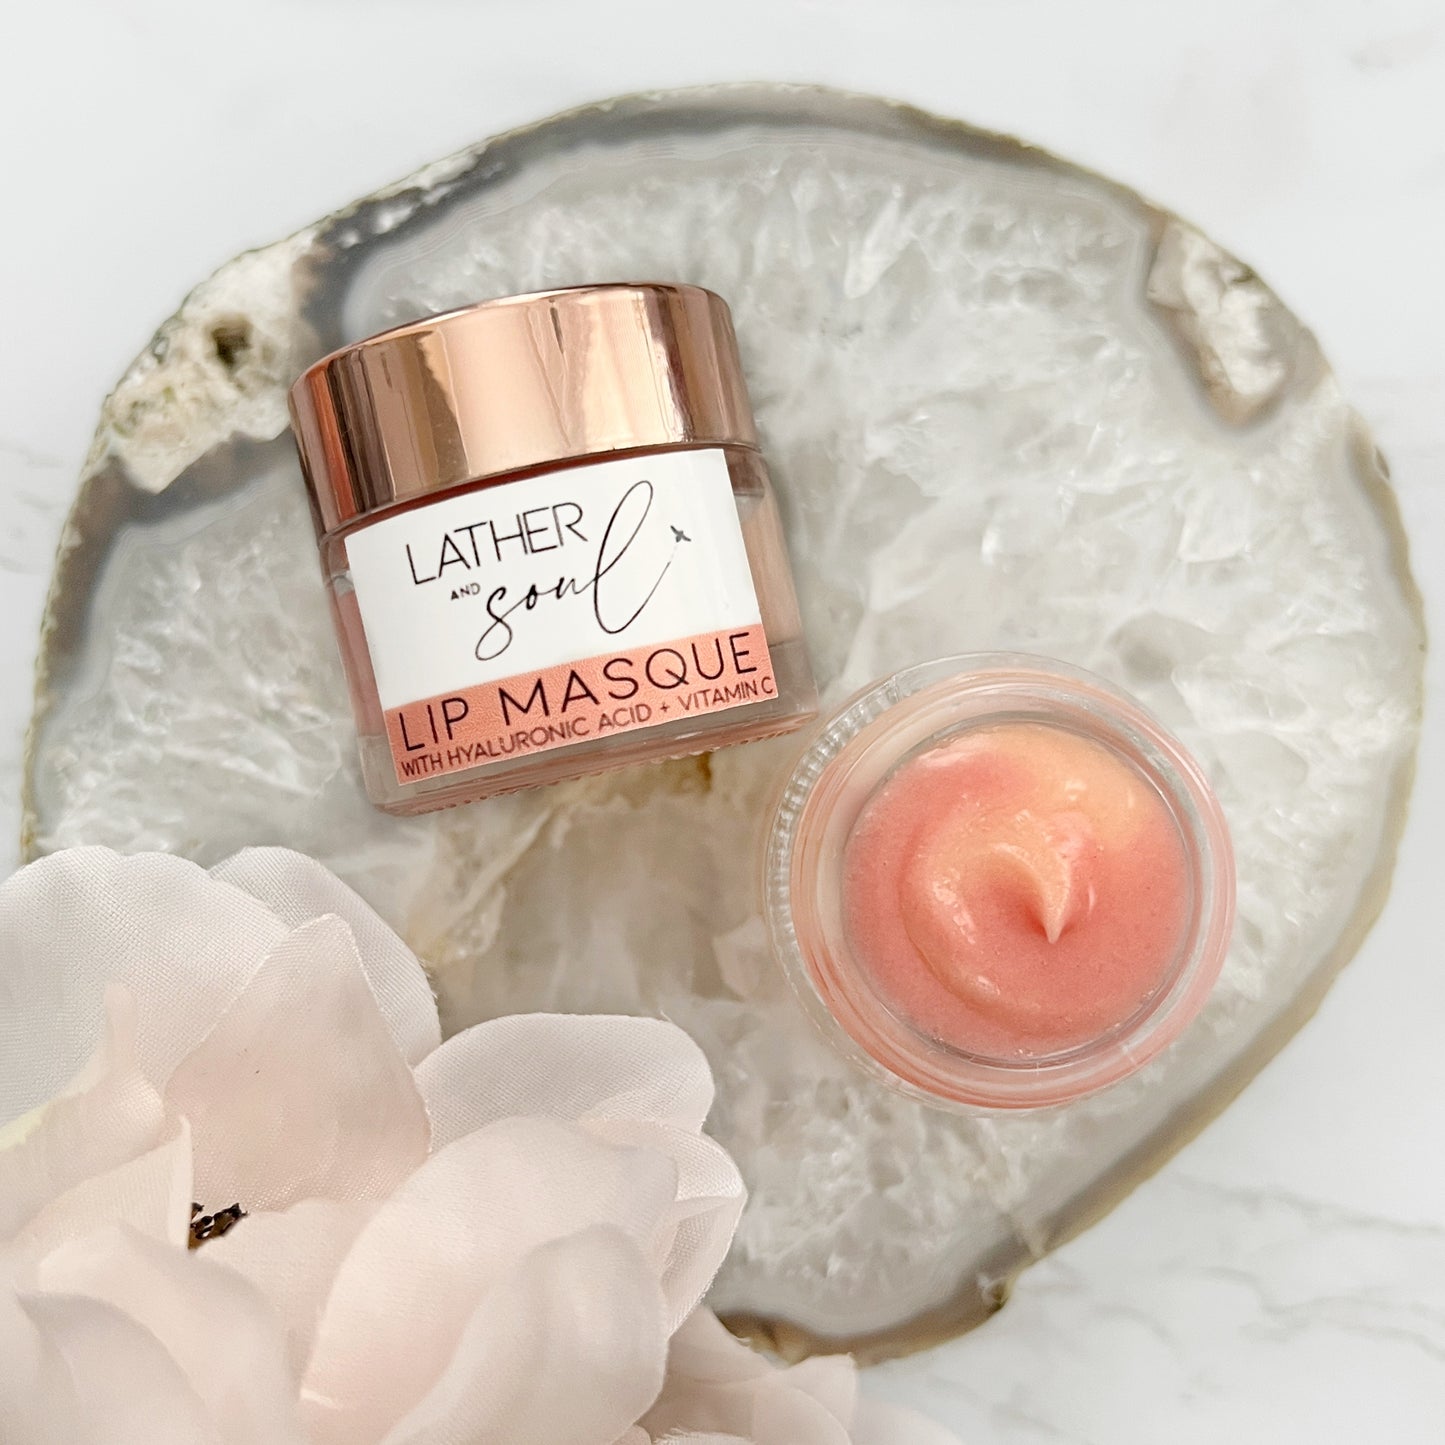 Captivating from Every Angle: A stunning, alternative view of our Hydrating Lip Masque jars showcases their elegant design and rich texture from a different perspective.